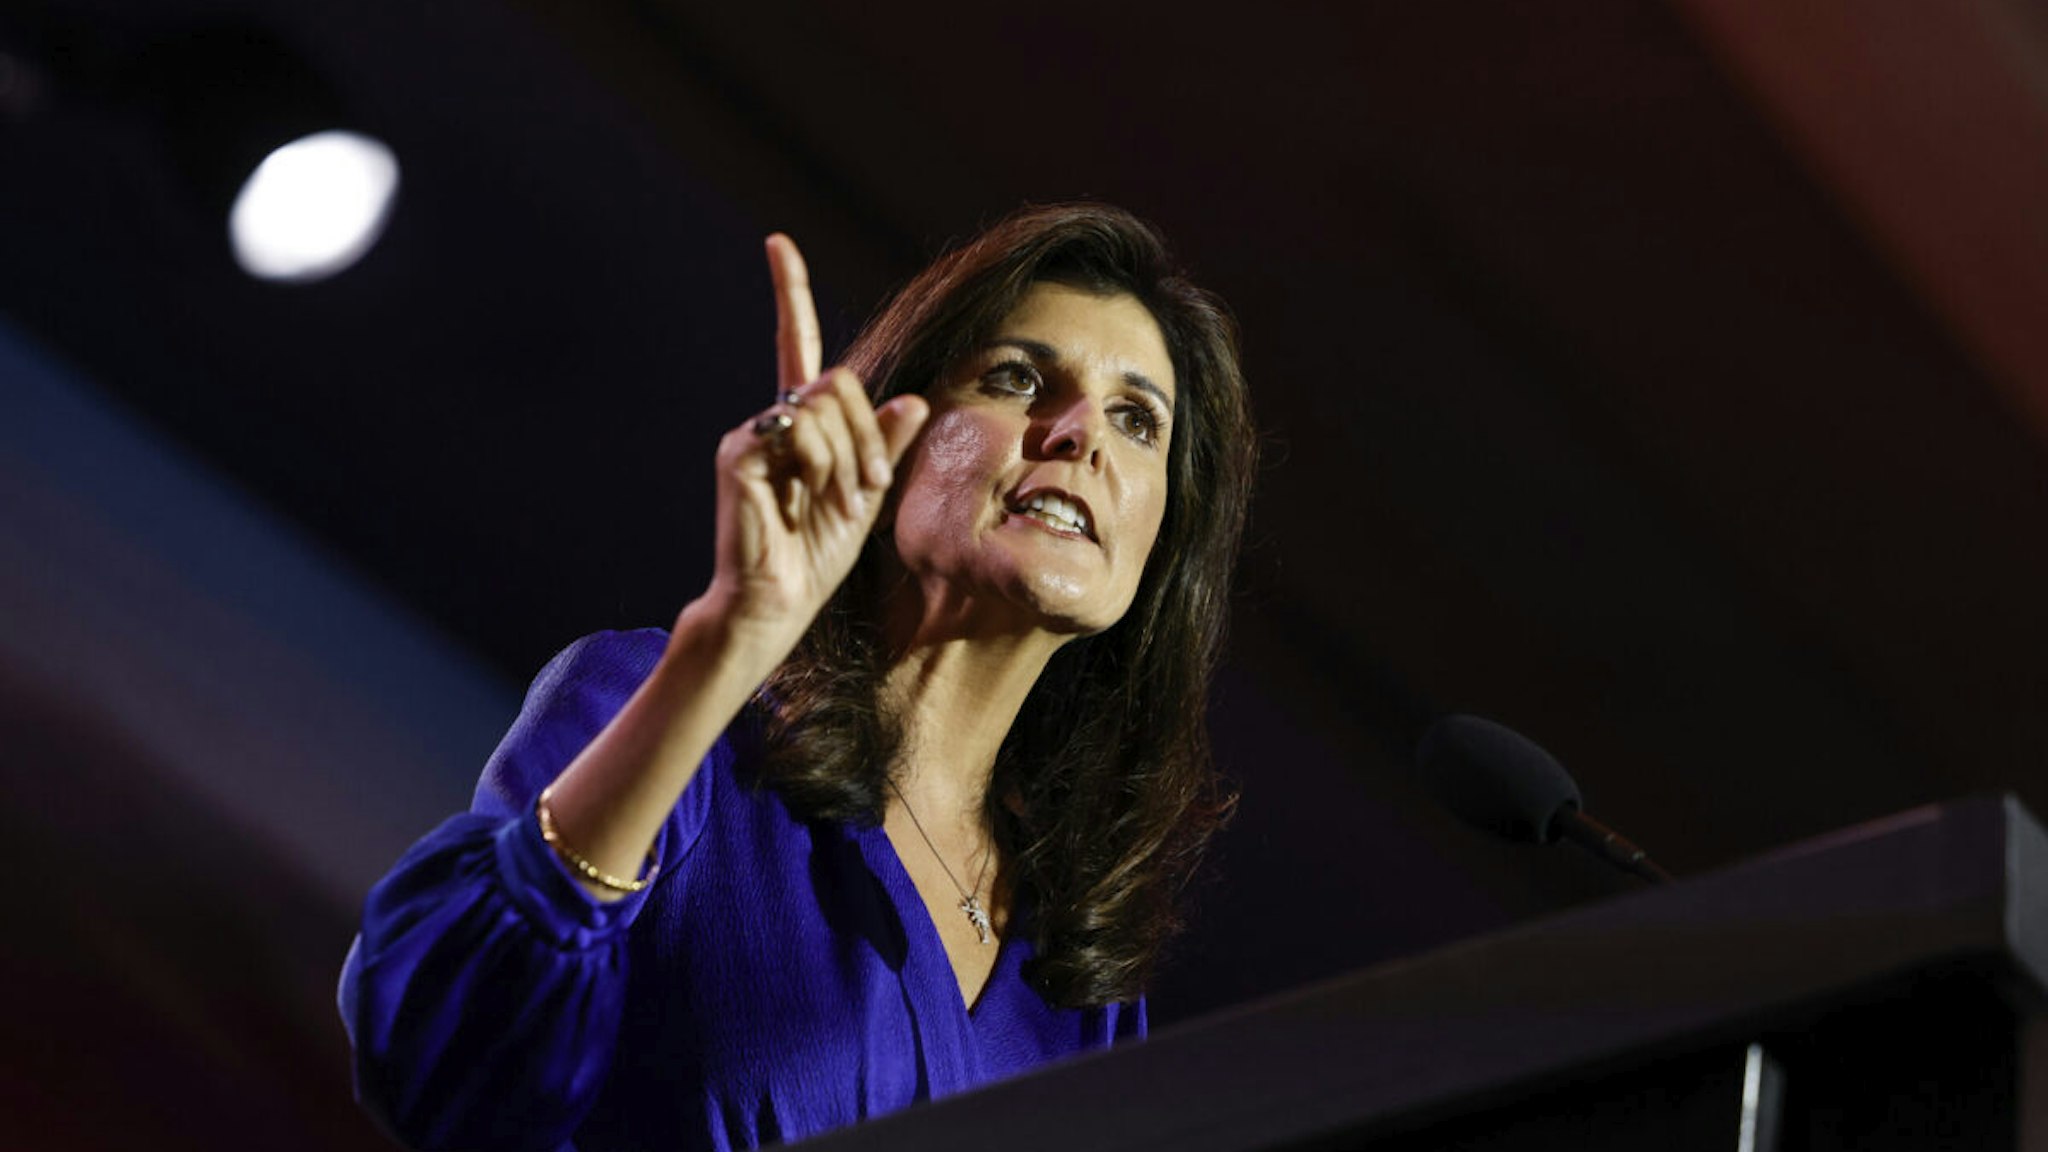 ARLINGTON, VIRGINIA - JULY 17: Republican presidential candidate Nikki Haley delivers remarks at the Christians United for Israel (CUFI) summit on July 17, 2023 in Arlington, Virginia. The former U.N. ambassador and other 2024 GOP hopefuls are making their cases before the pro-Israeli group.